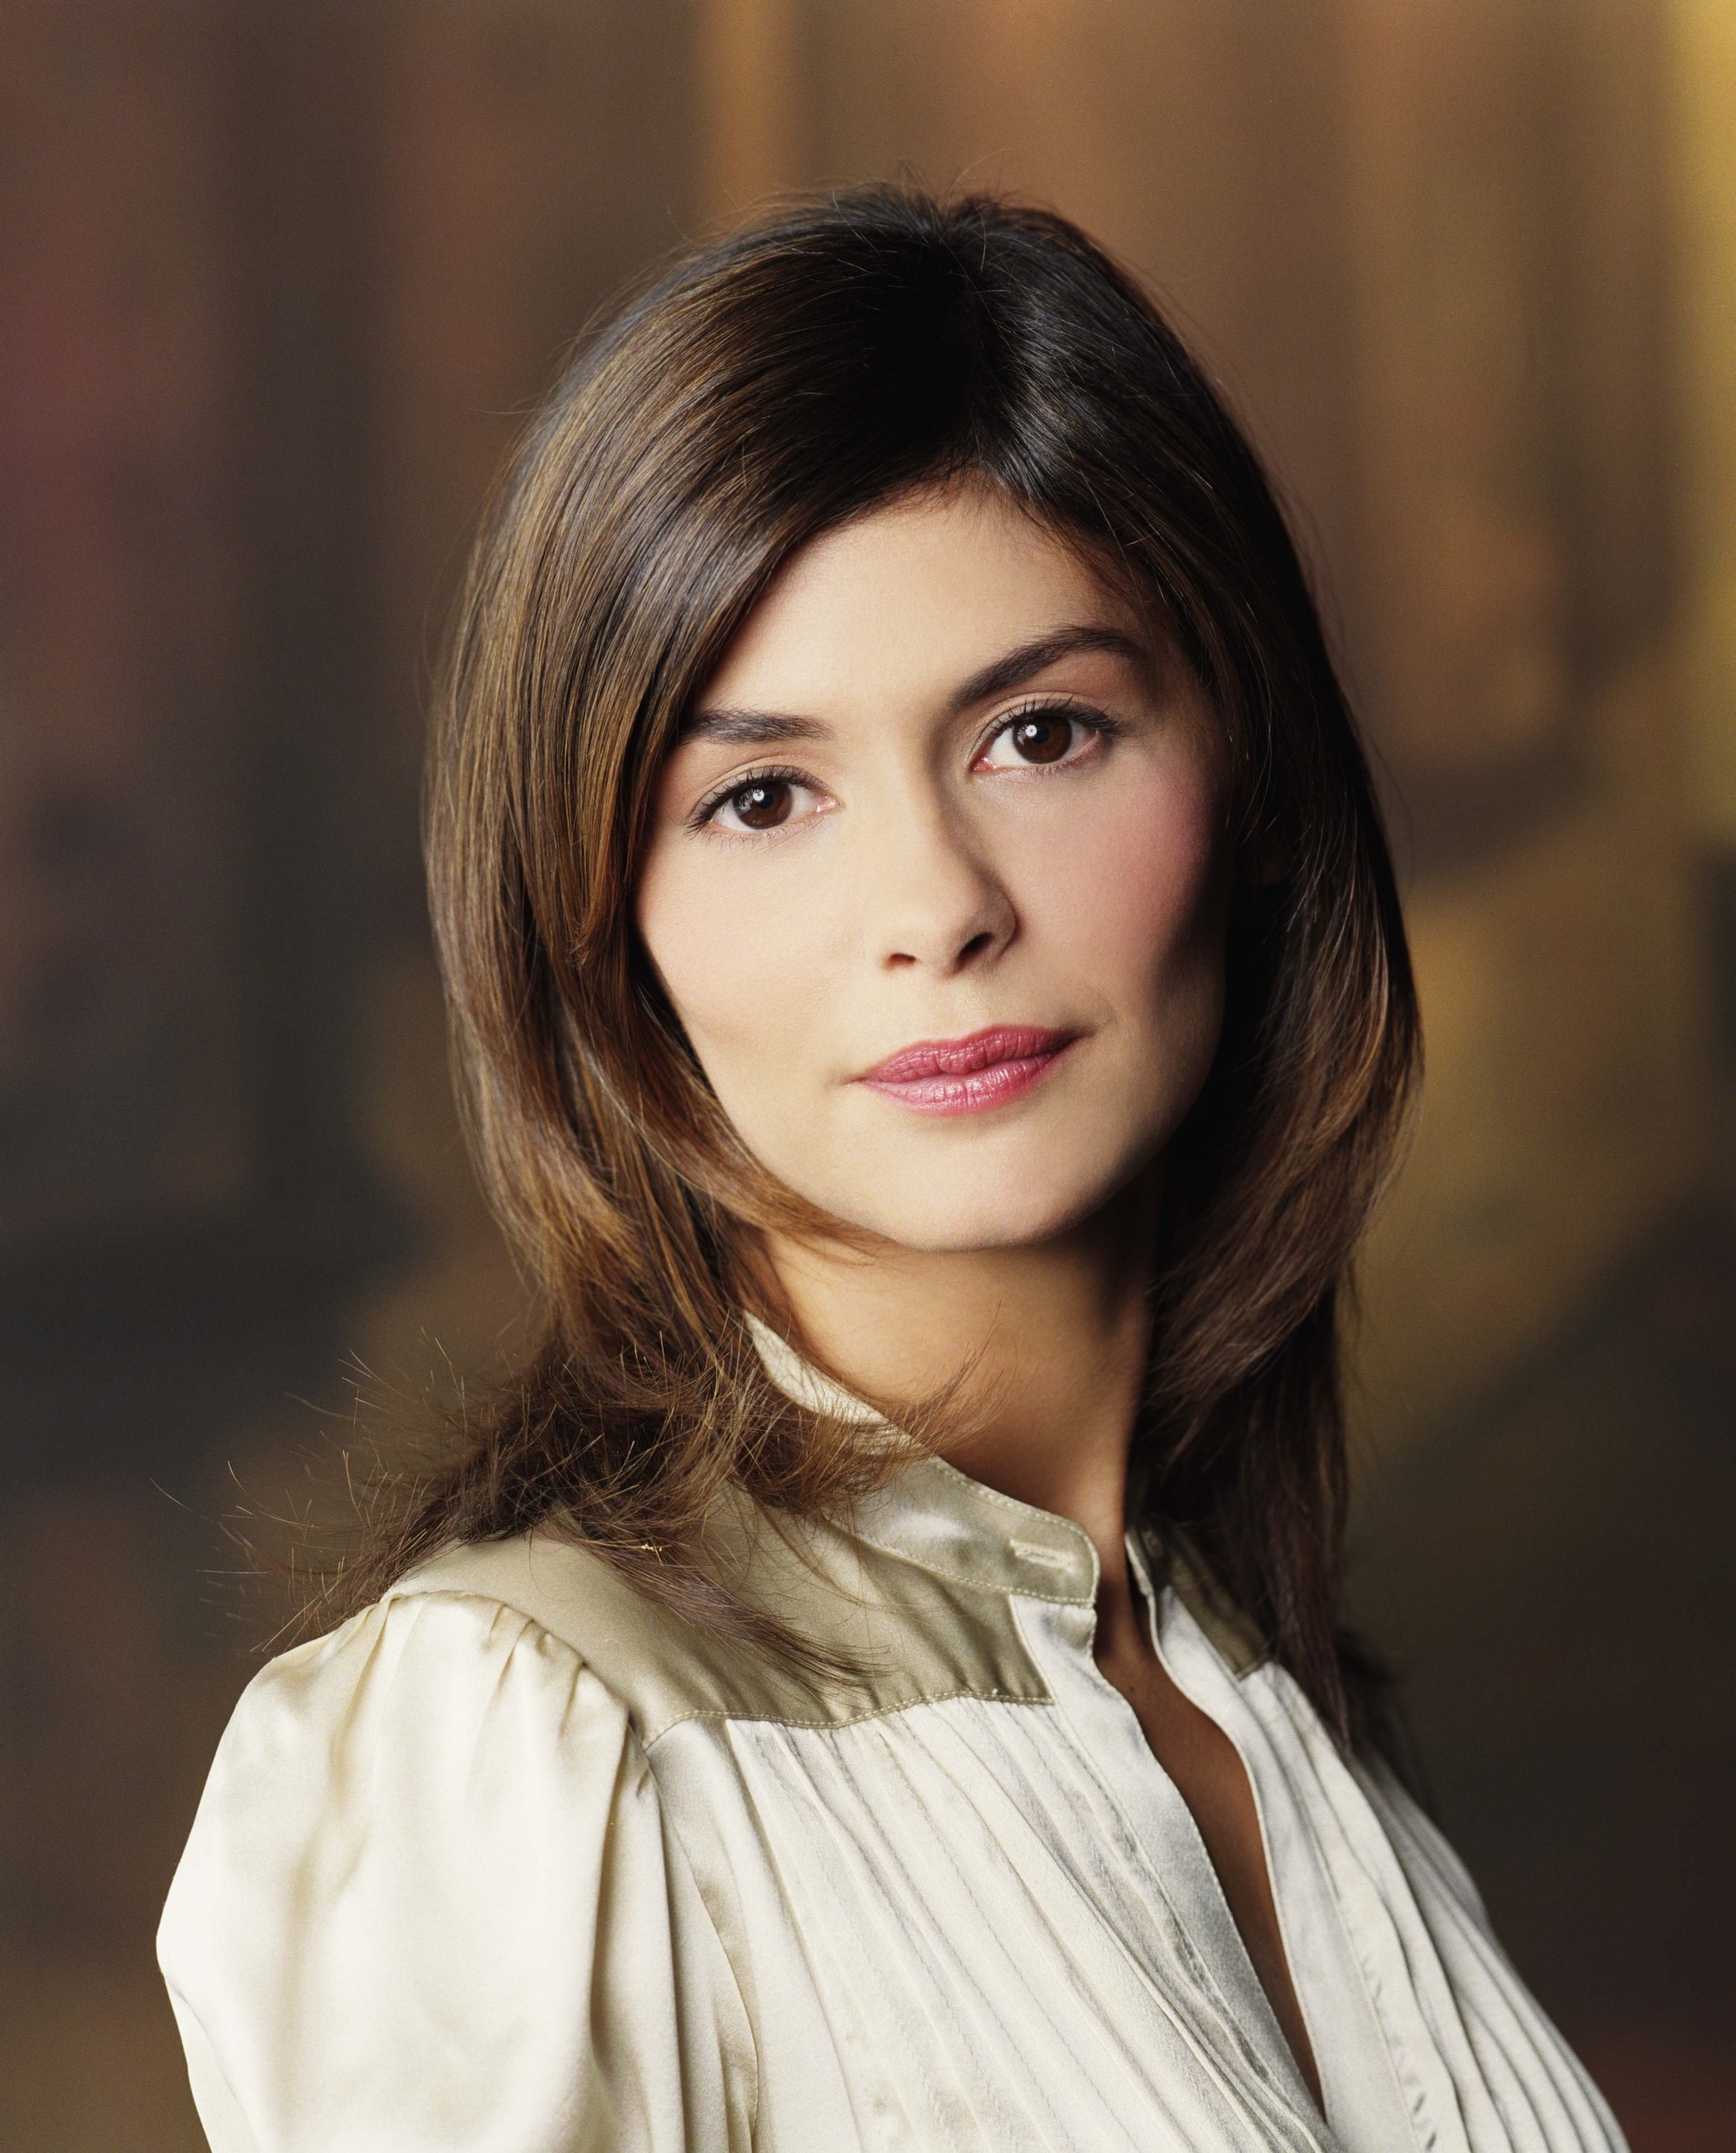 People 2000x2480 Audrey Tautou actress women French women face long hair brunette depth of field portrait display